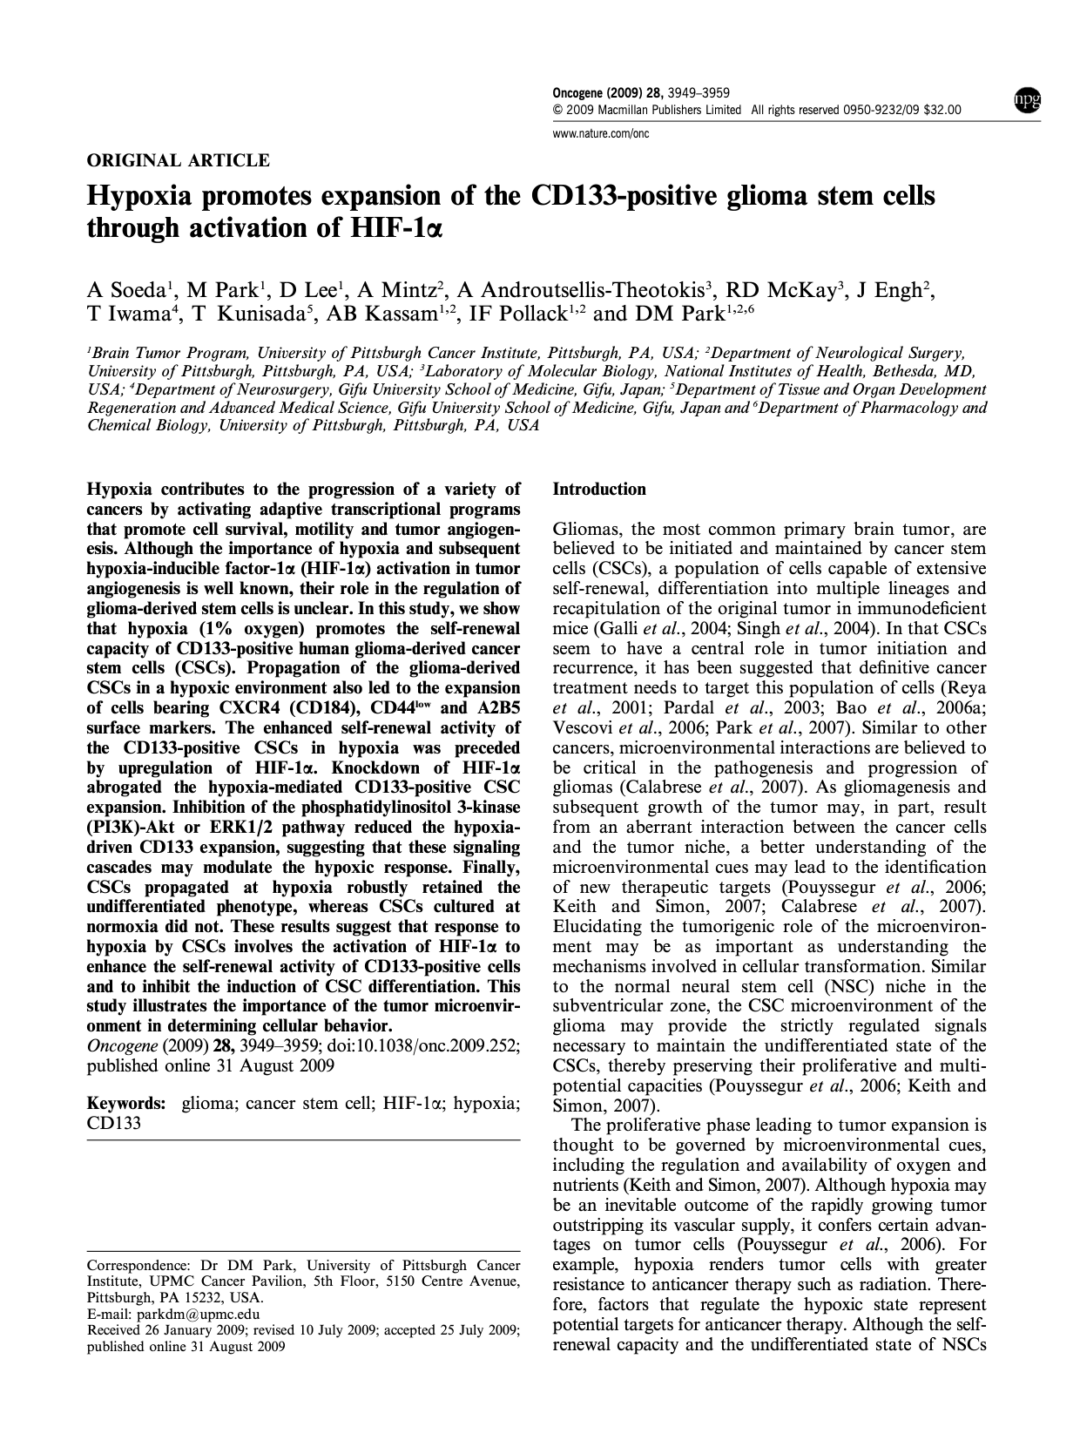 Hypoxia promotes expansion of the CD133-positive glioma stem cells